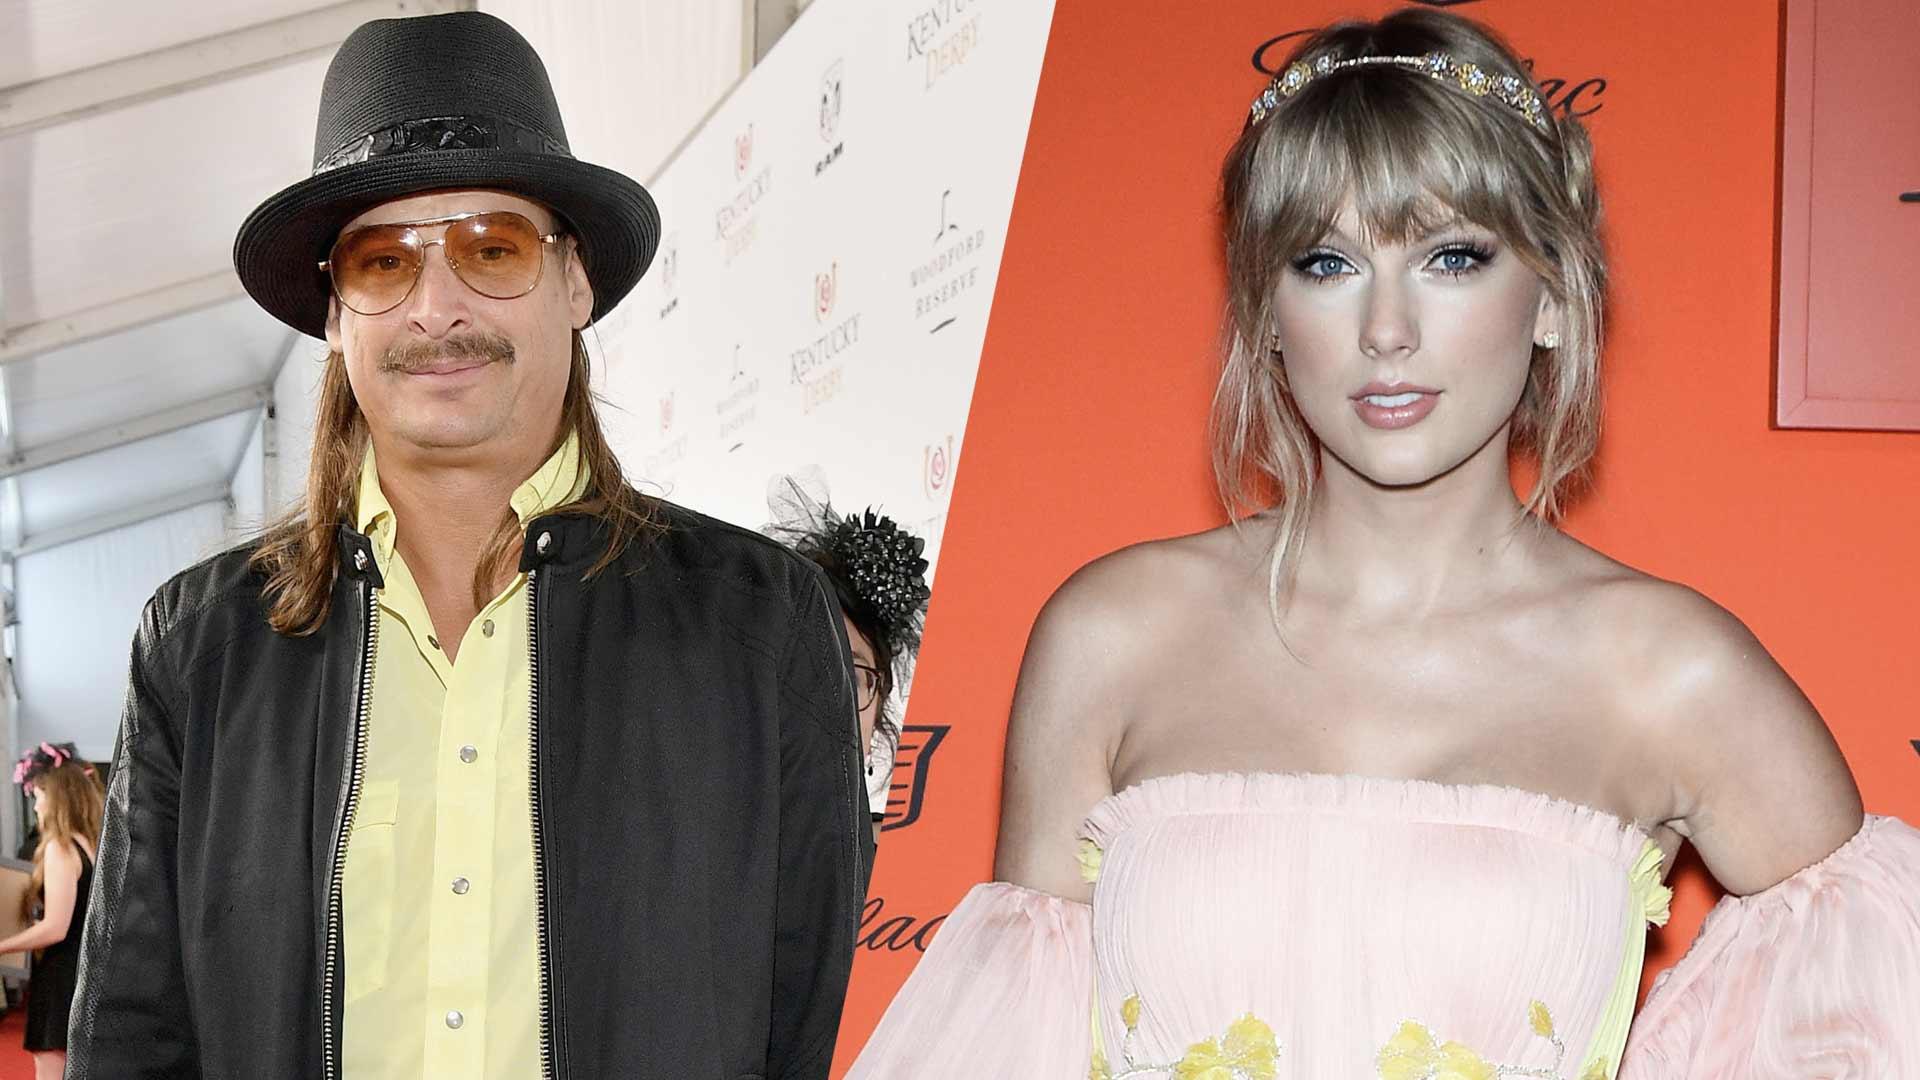 Kid Rock Slams Taylor Swift for Being a Democrat, Accuses Her of Sleeping Her Way Through Hollywood